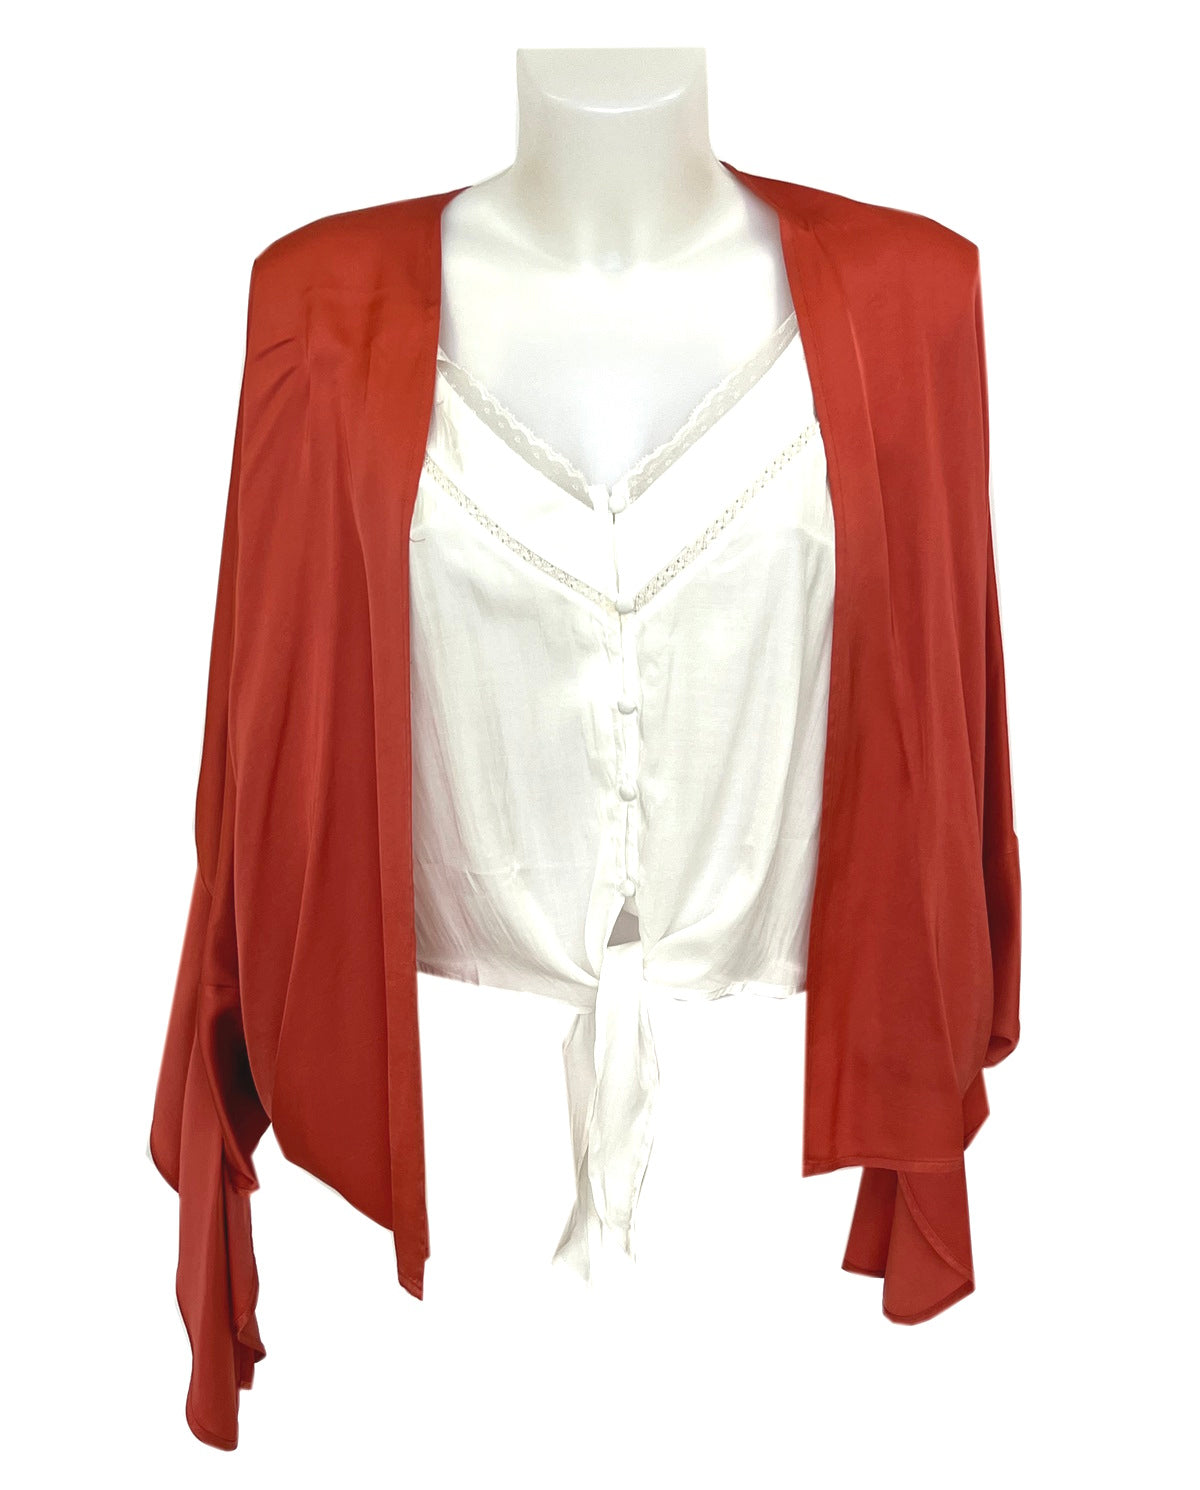 Cardigan, Brand Ad Blanco, Made in Italy, art. AD085